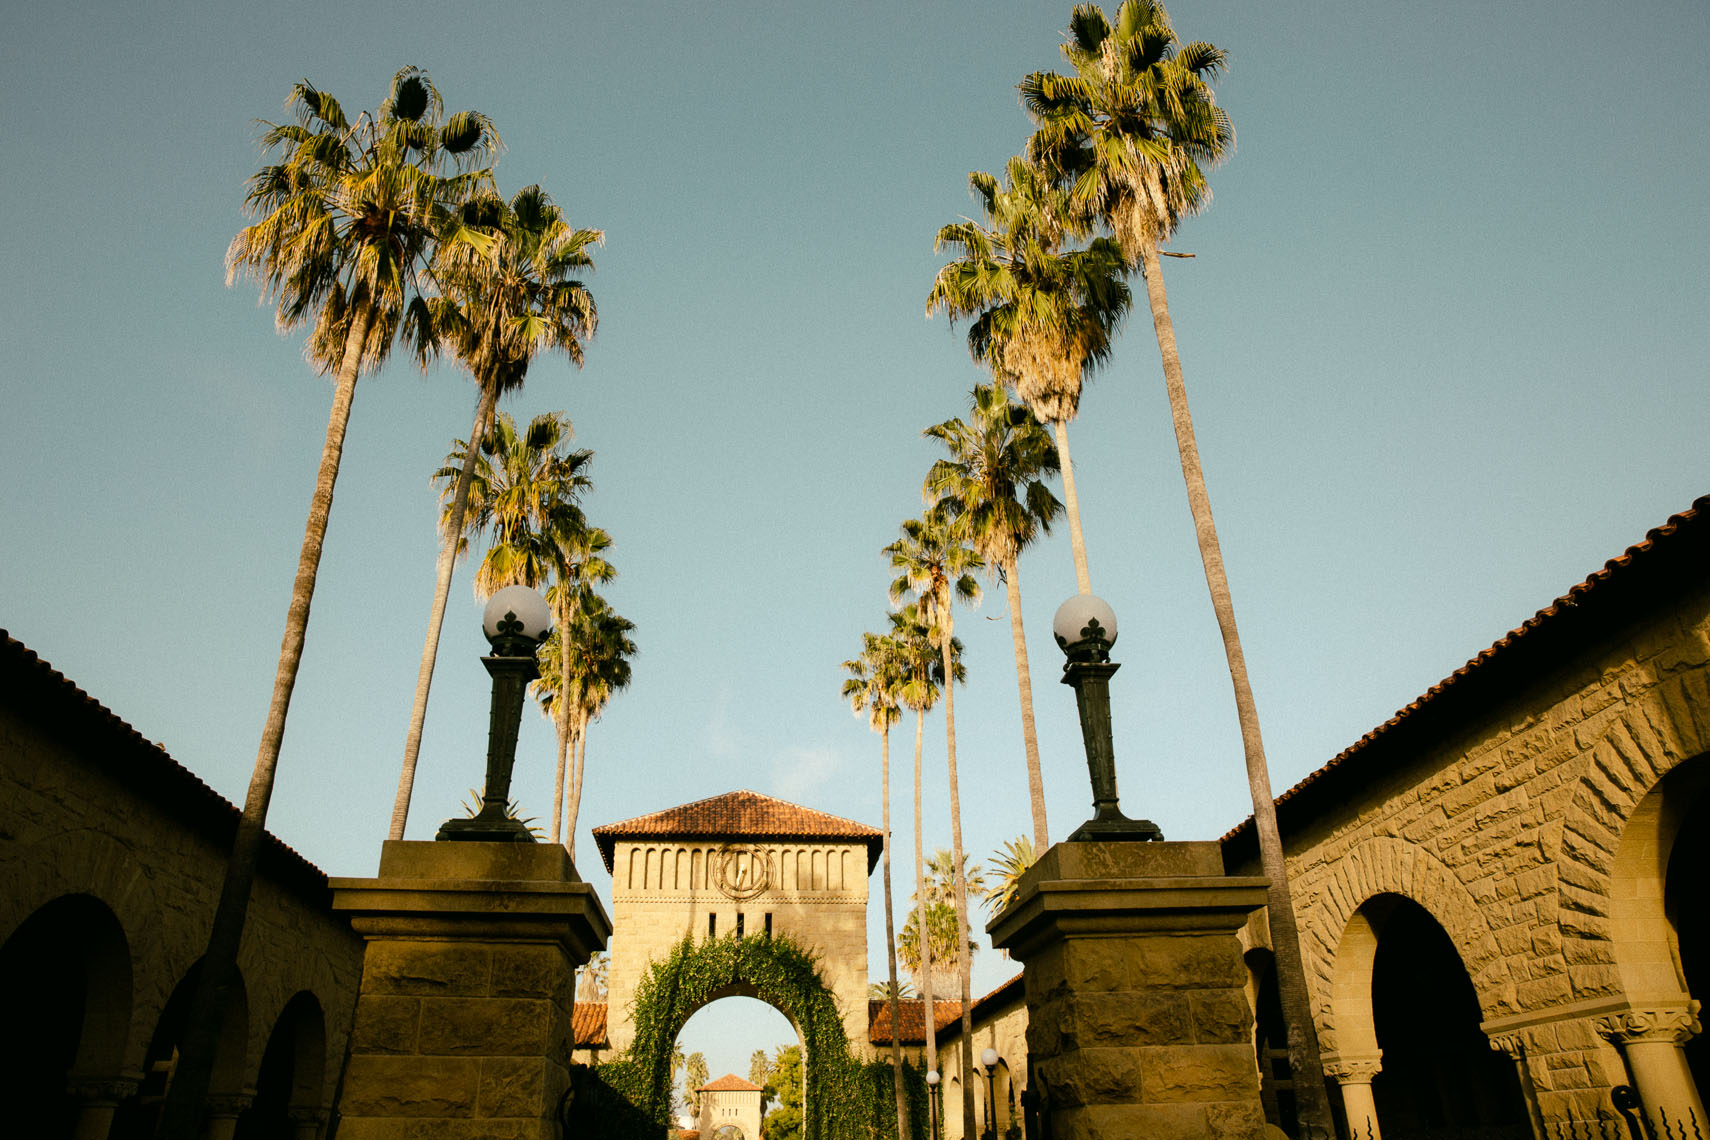 Stanford University quad with palm trees and arches.